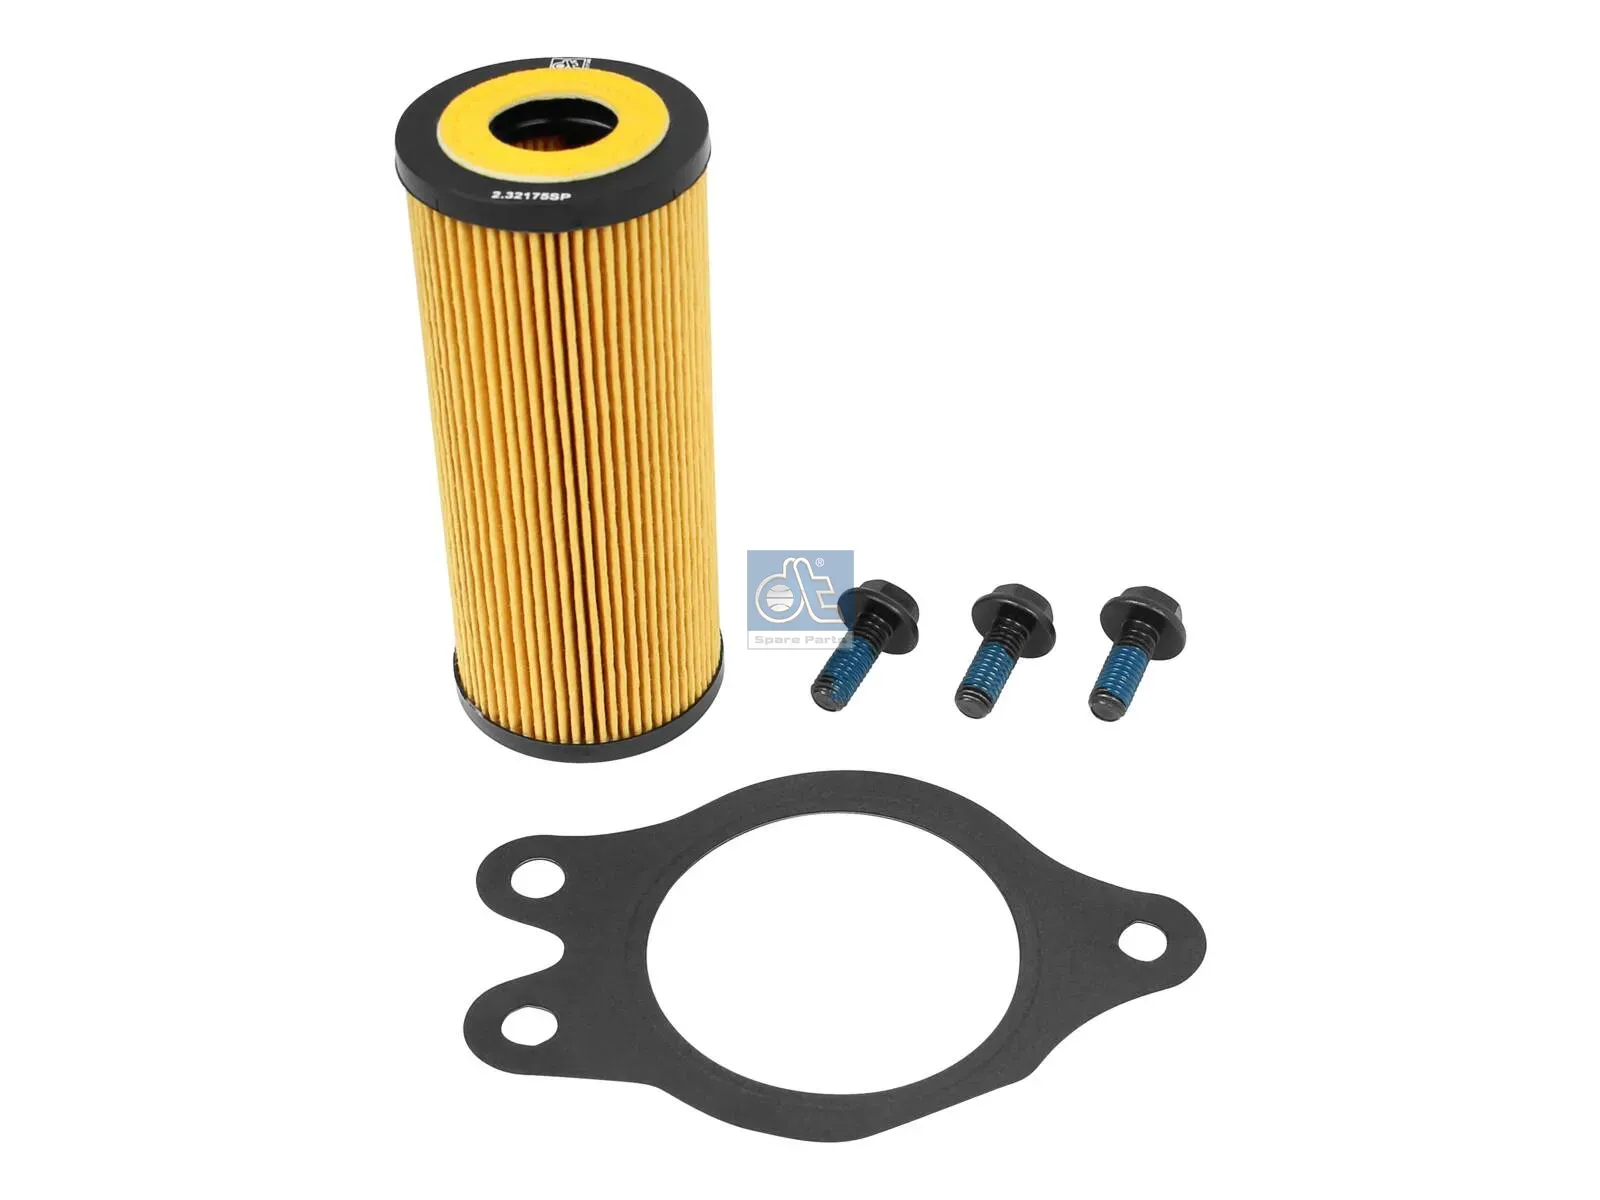 Oil filter kit, gearbox